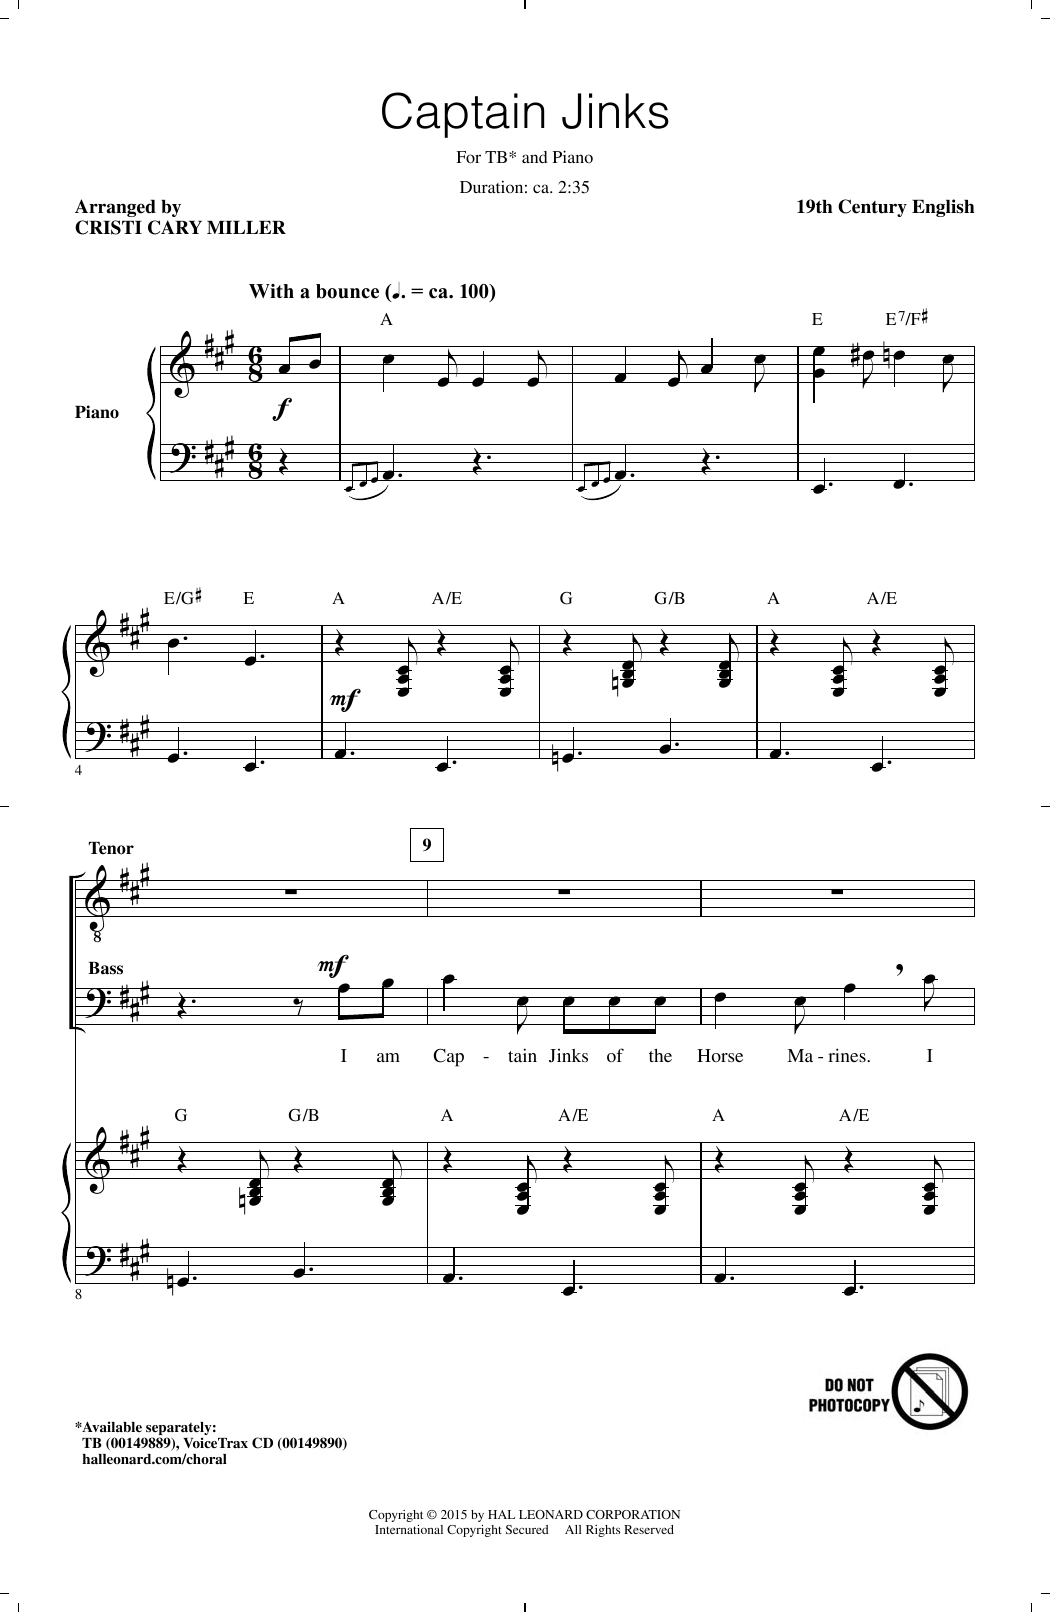 Download Traditional Folksong Captain Jinks (arr. Cristi Cary Miller) Sheet Music